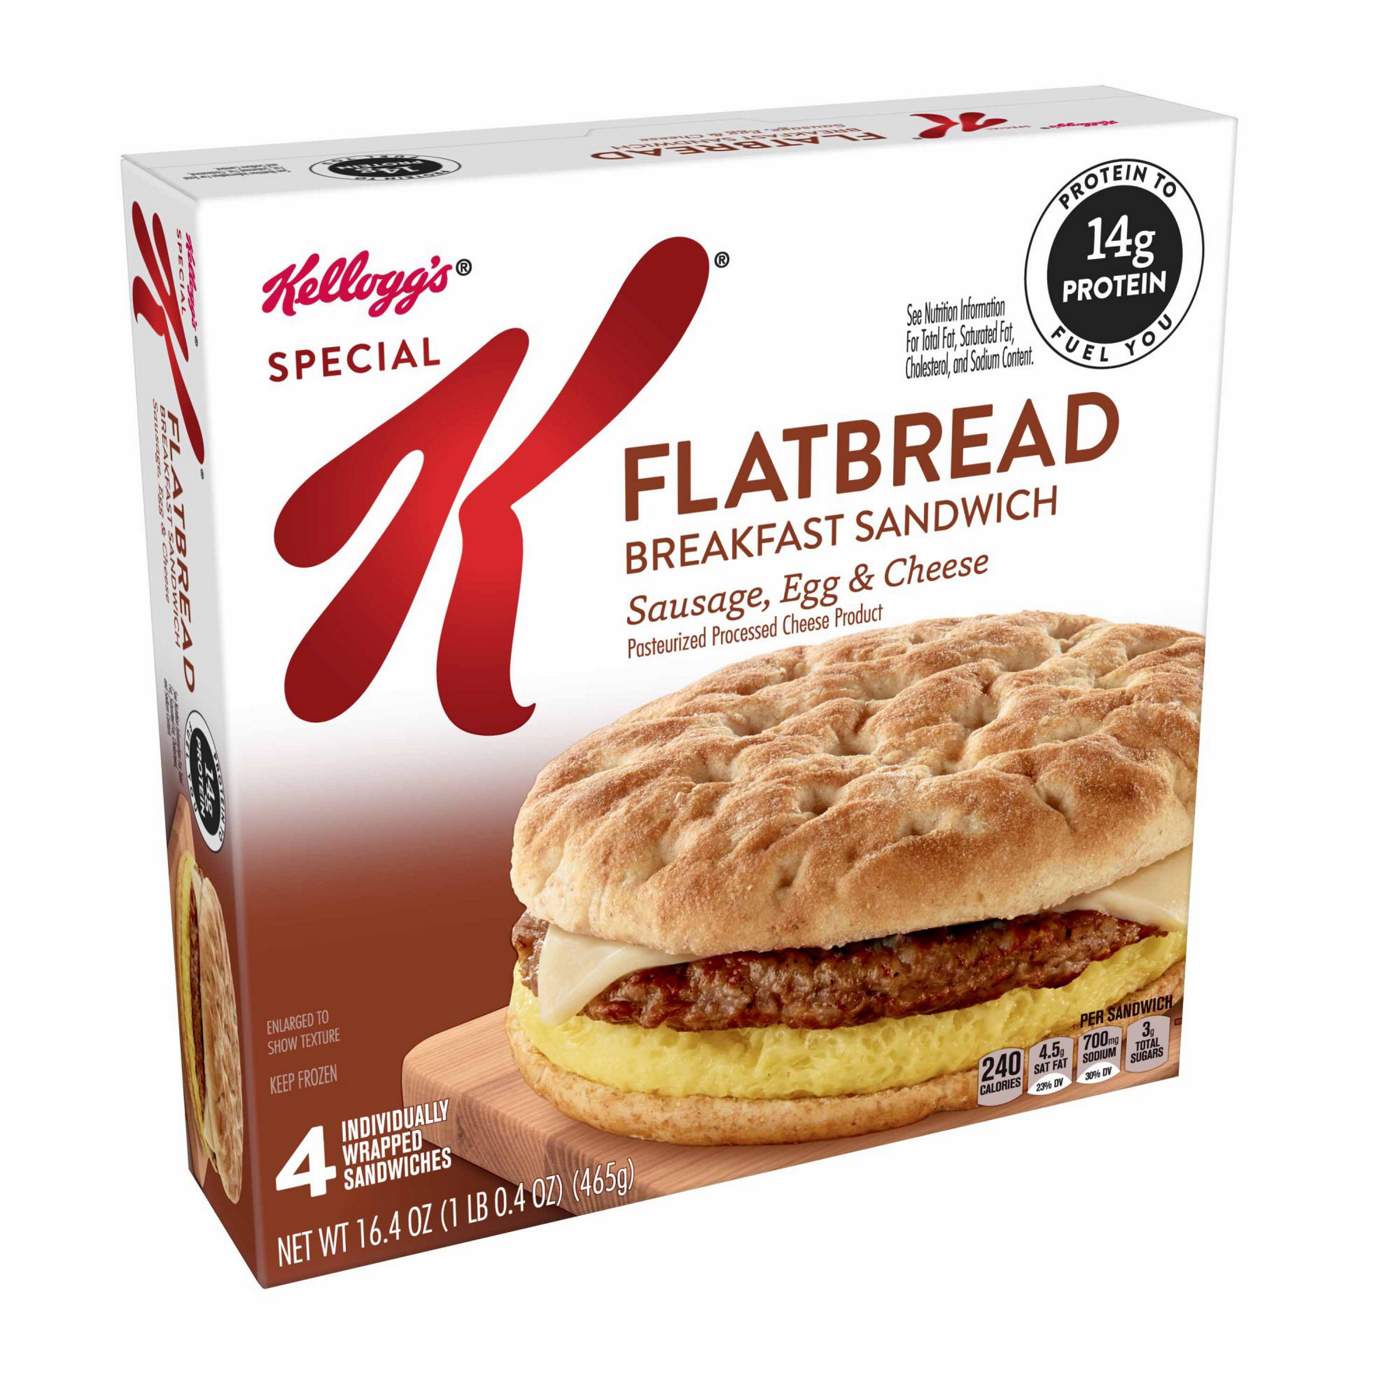 Kellogg's Special K Flatbread Breakfast Sandwiches Sausage, Egg, and Cheese; image 2 of 6